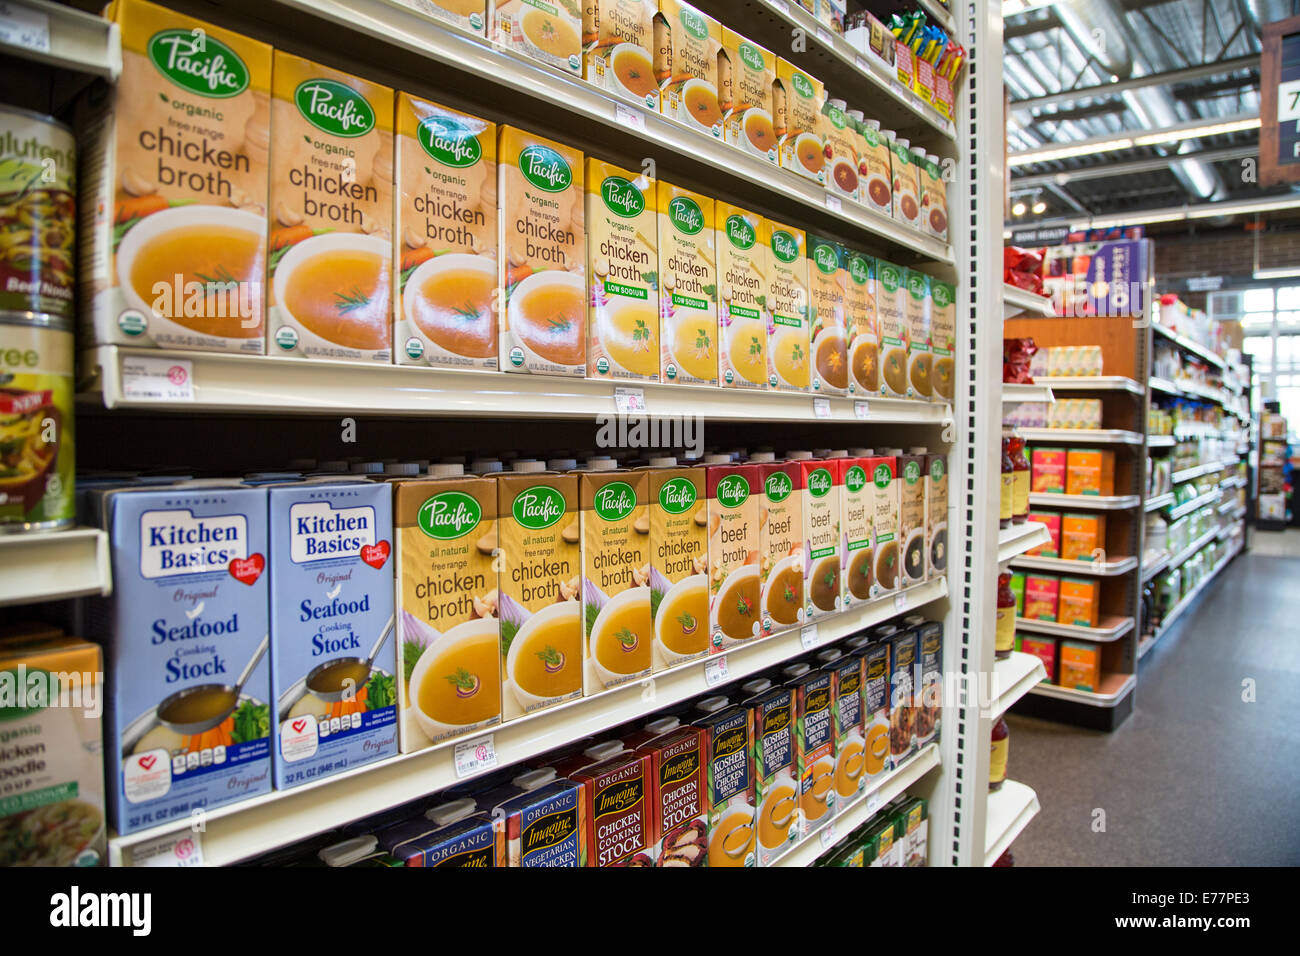 A natural foods grocery store aisle with organic broths and stocks. Stock Photo